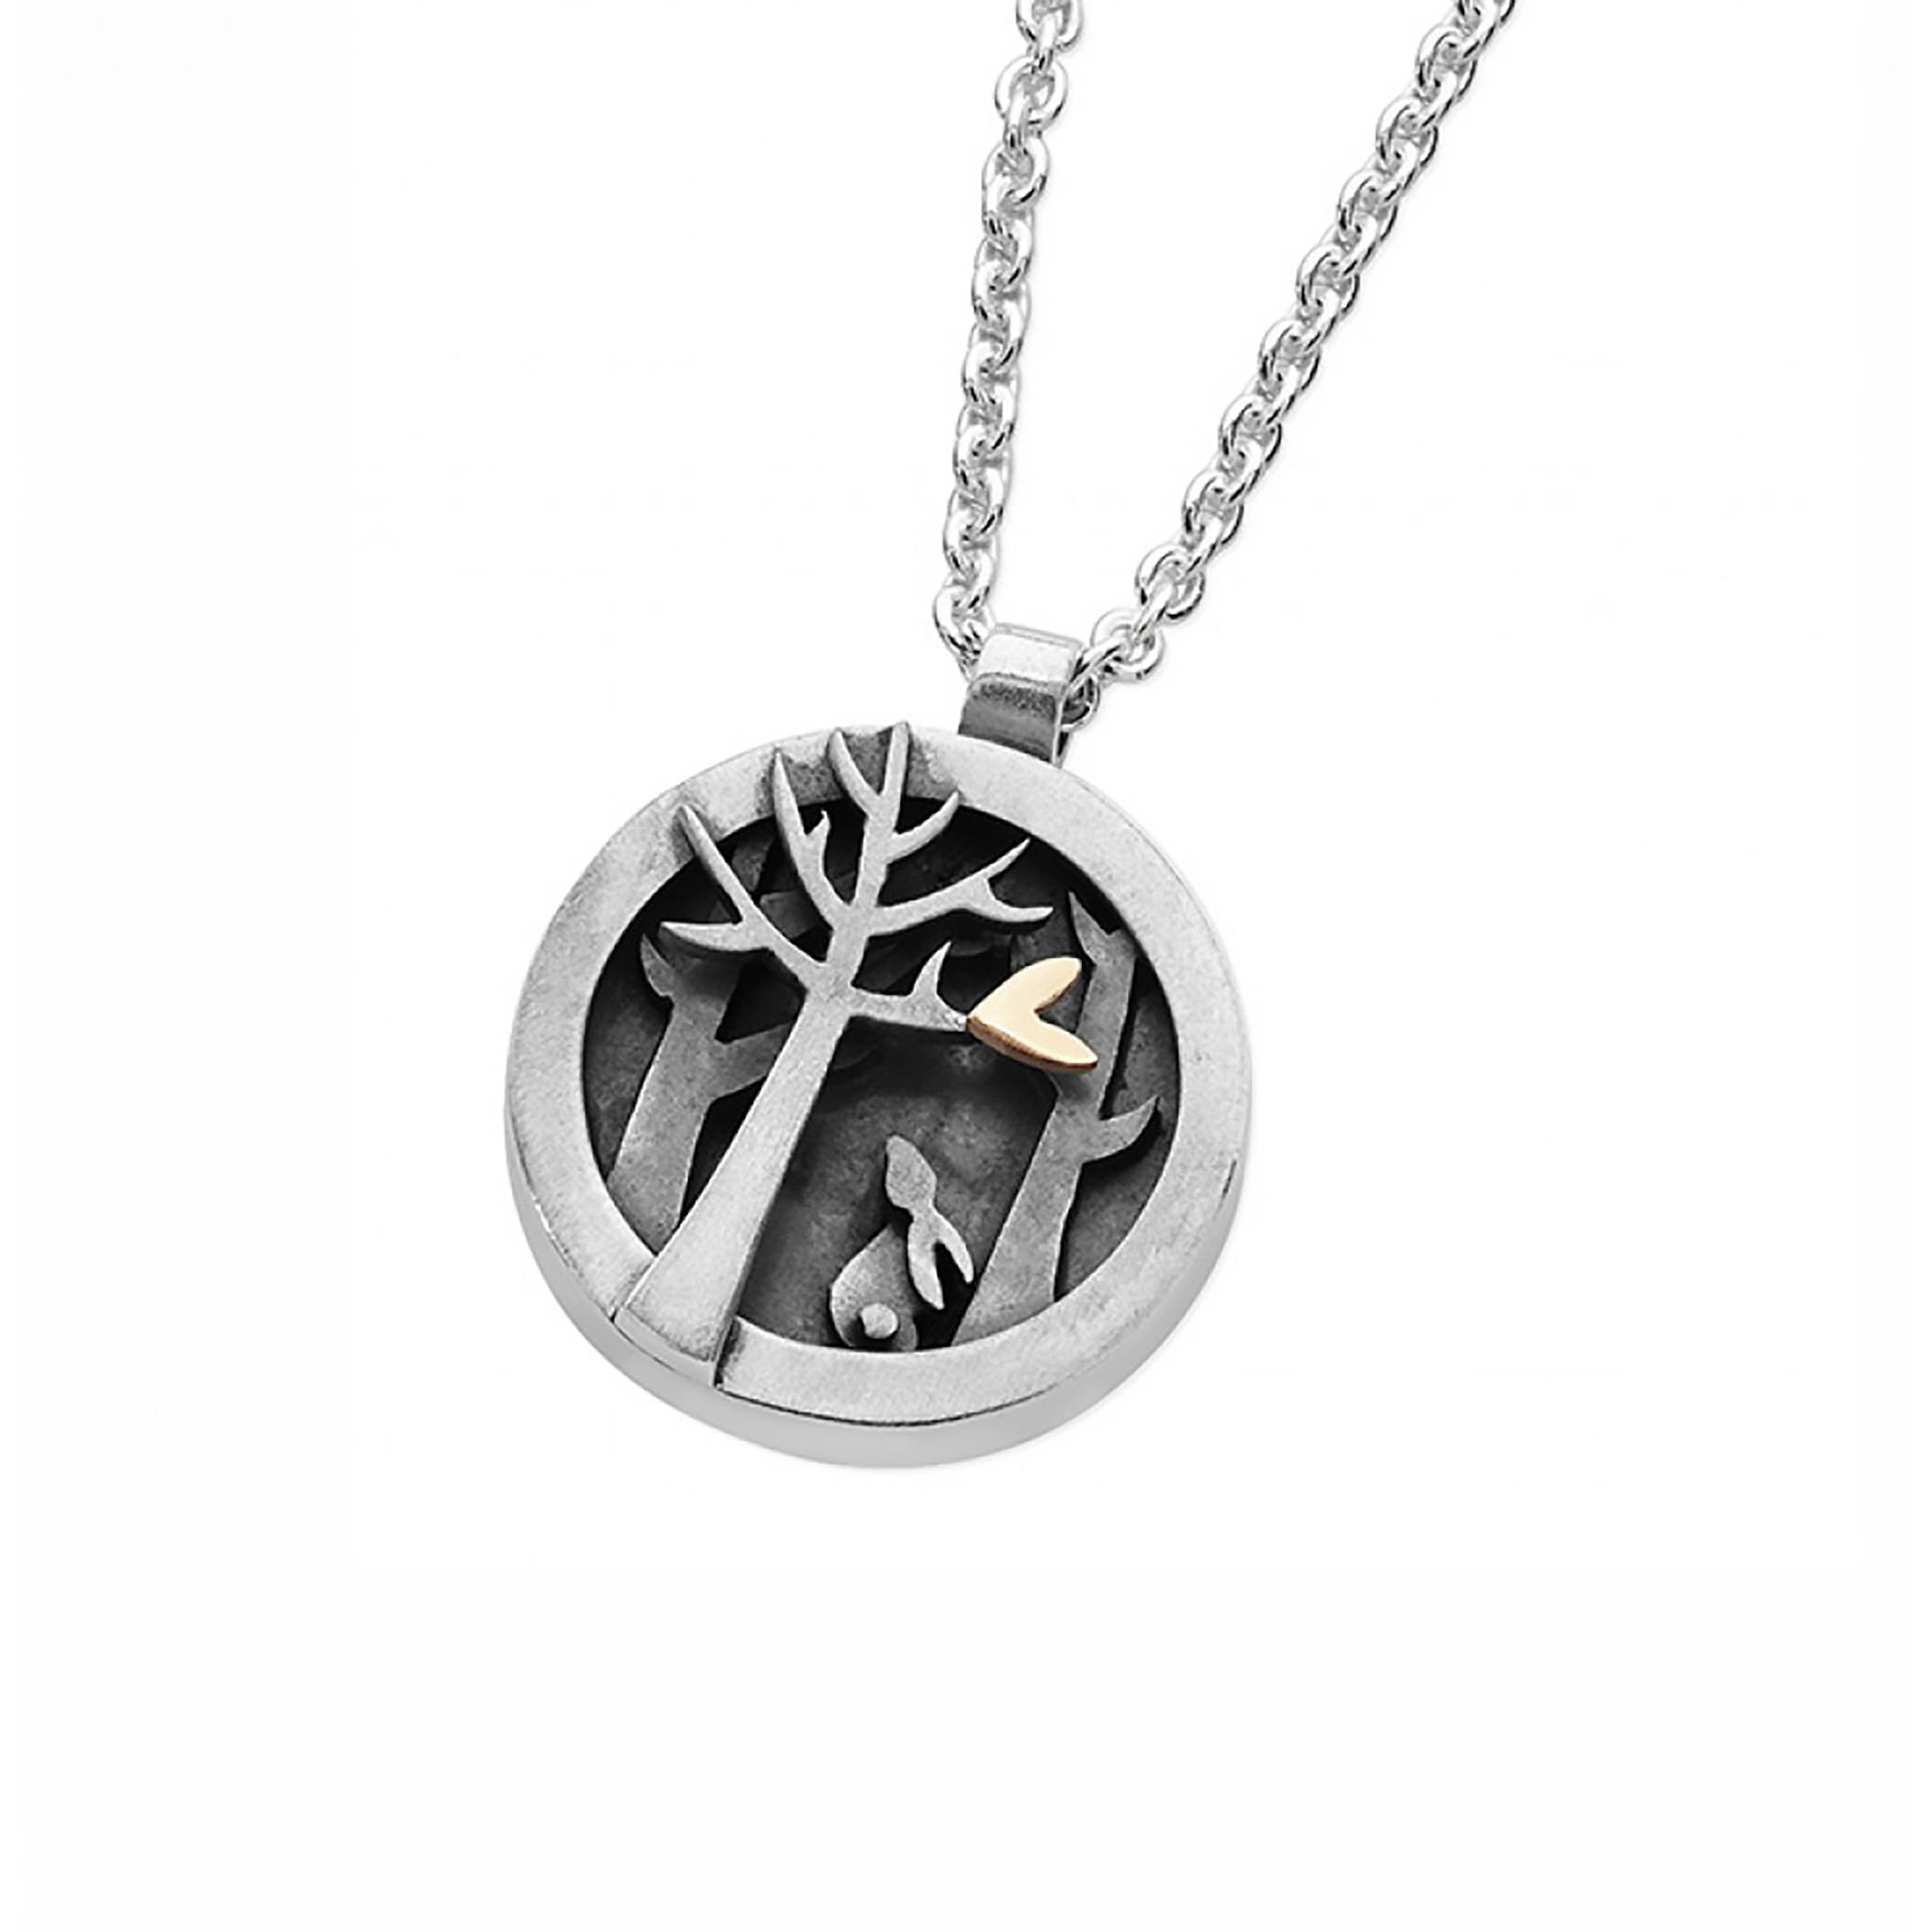 Detailed round silver pendant with layered forest details, a bunny and a little gold heart, on a silver chain